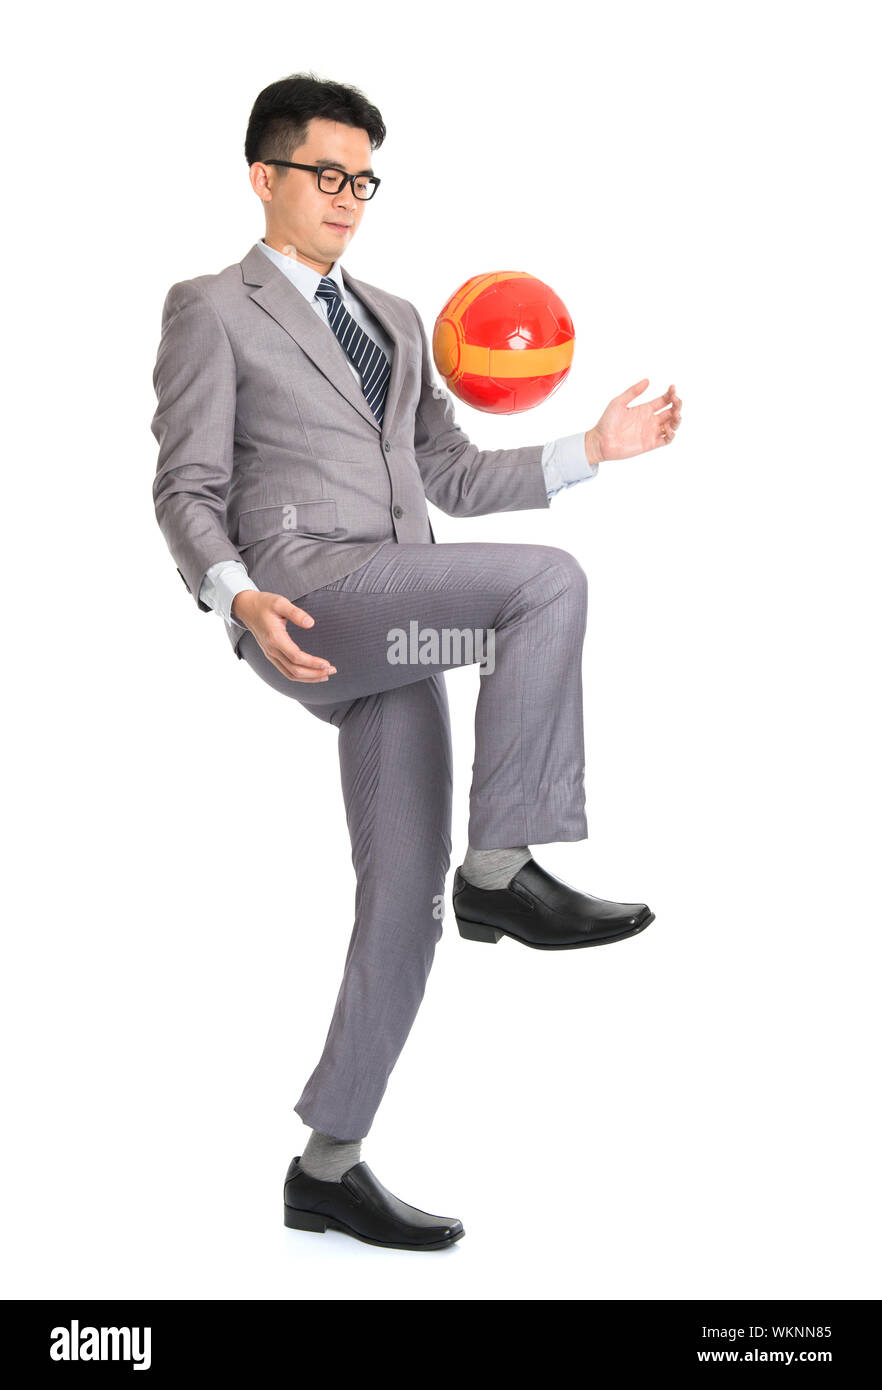 Portrait of full length Asian businessman playing with soccer ball, isolated on white background. Stock Photo